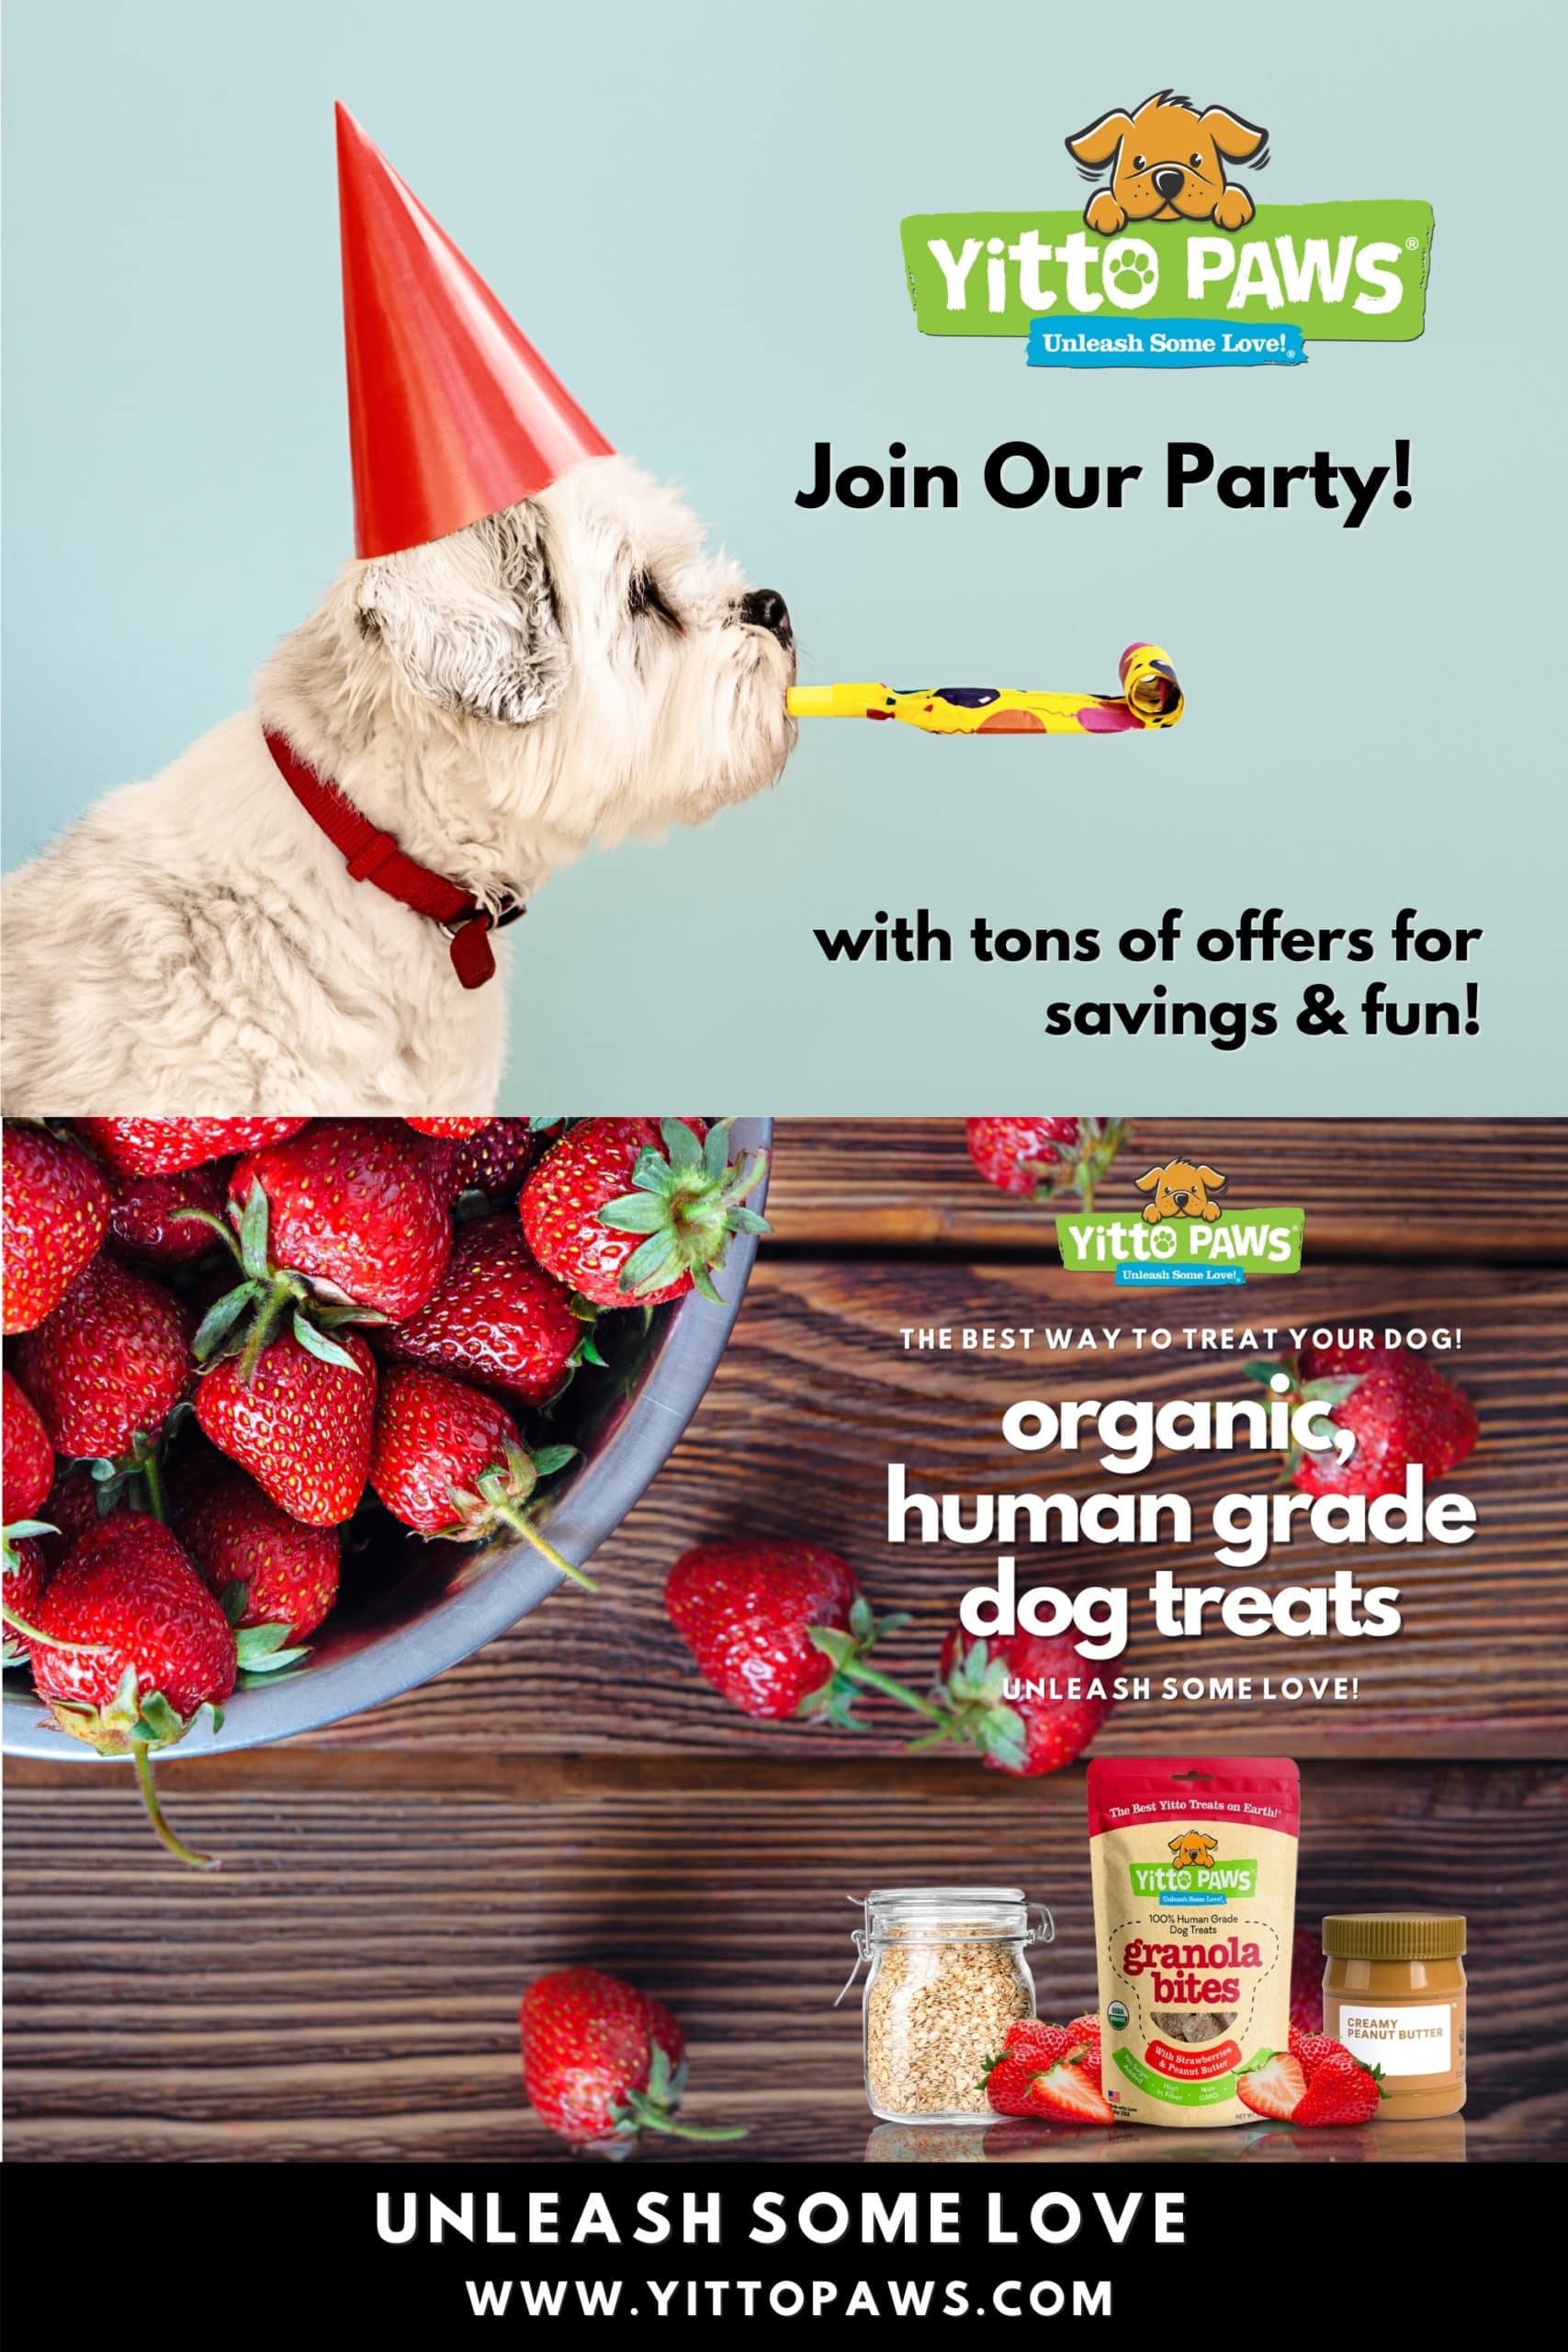 Join our party that's filled with tons of offers for savings & fun!